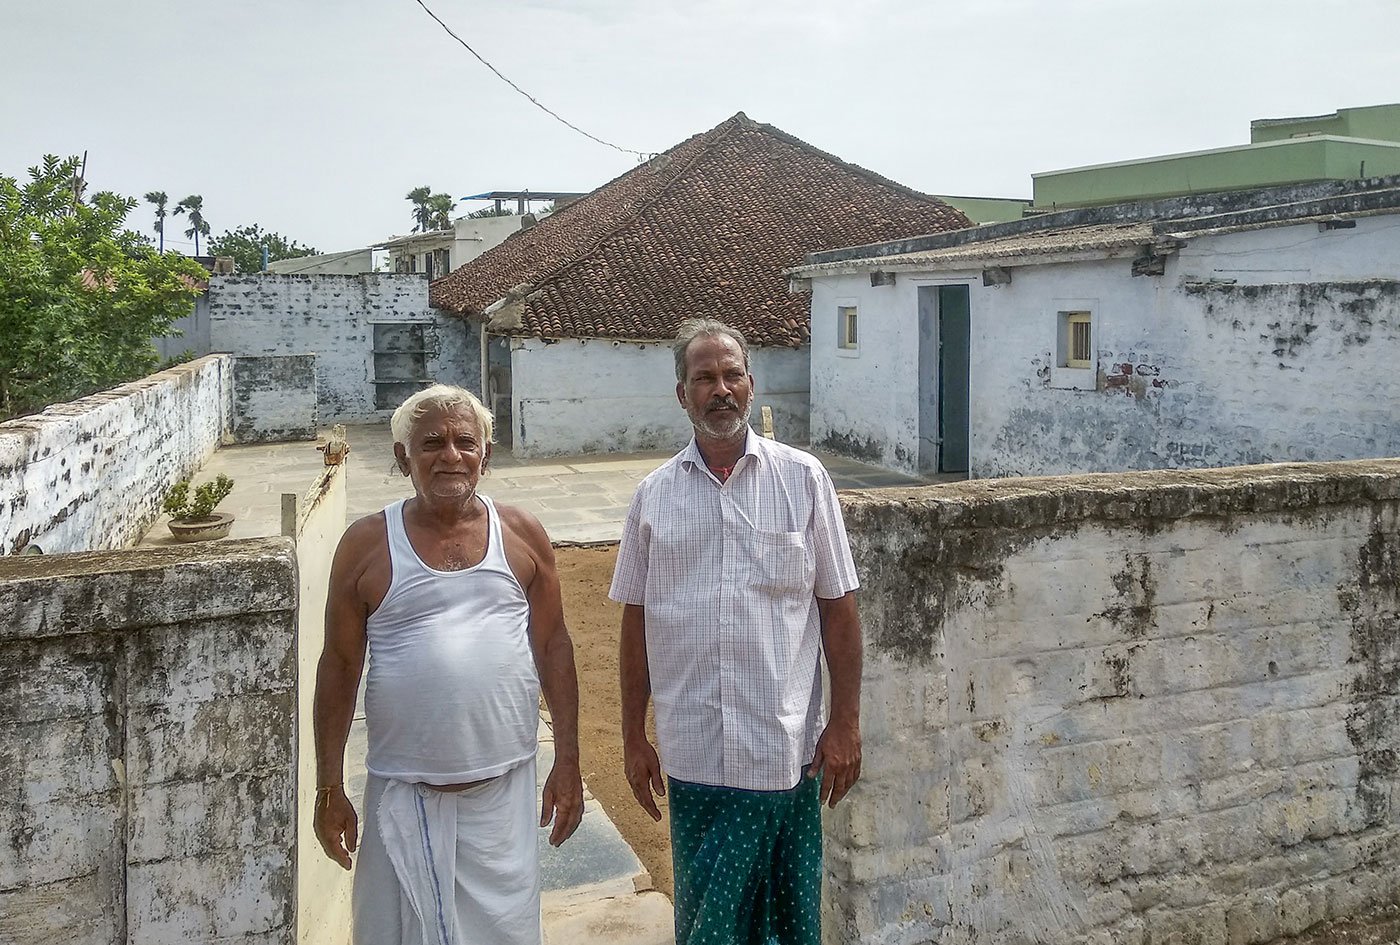 Adjacent tiled houses of Sankara Rao and Narina Subba Rao which weren’t renewed. The owner of the house, Narina Subba Rao, also gave his 10 acres of land for LPS